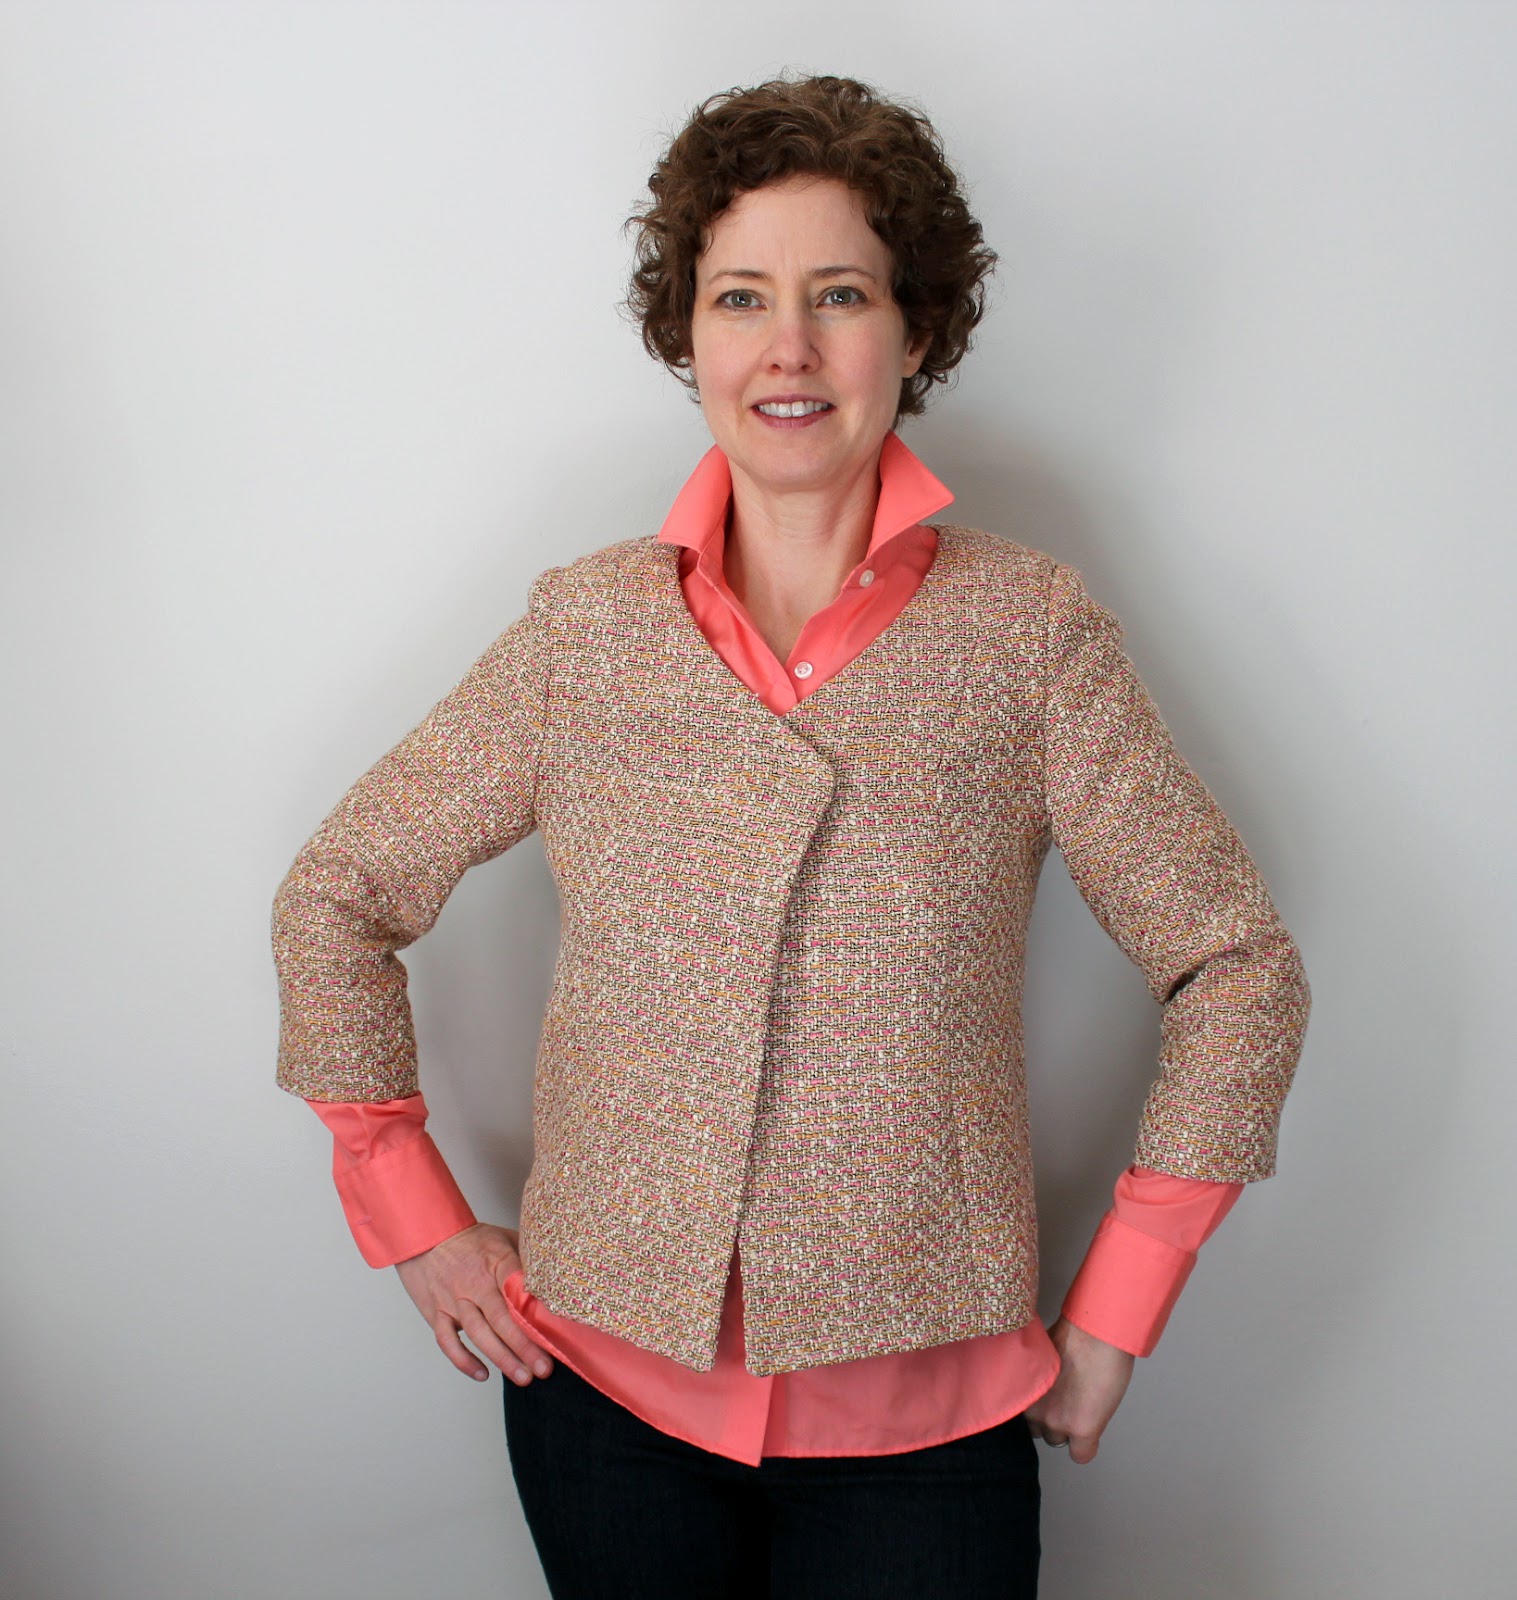 A Sewing Life: Simplicity 2209 Lissette Unlined Jacket